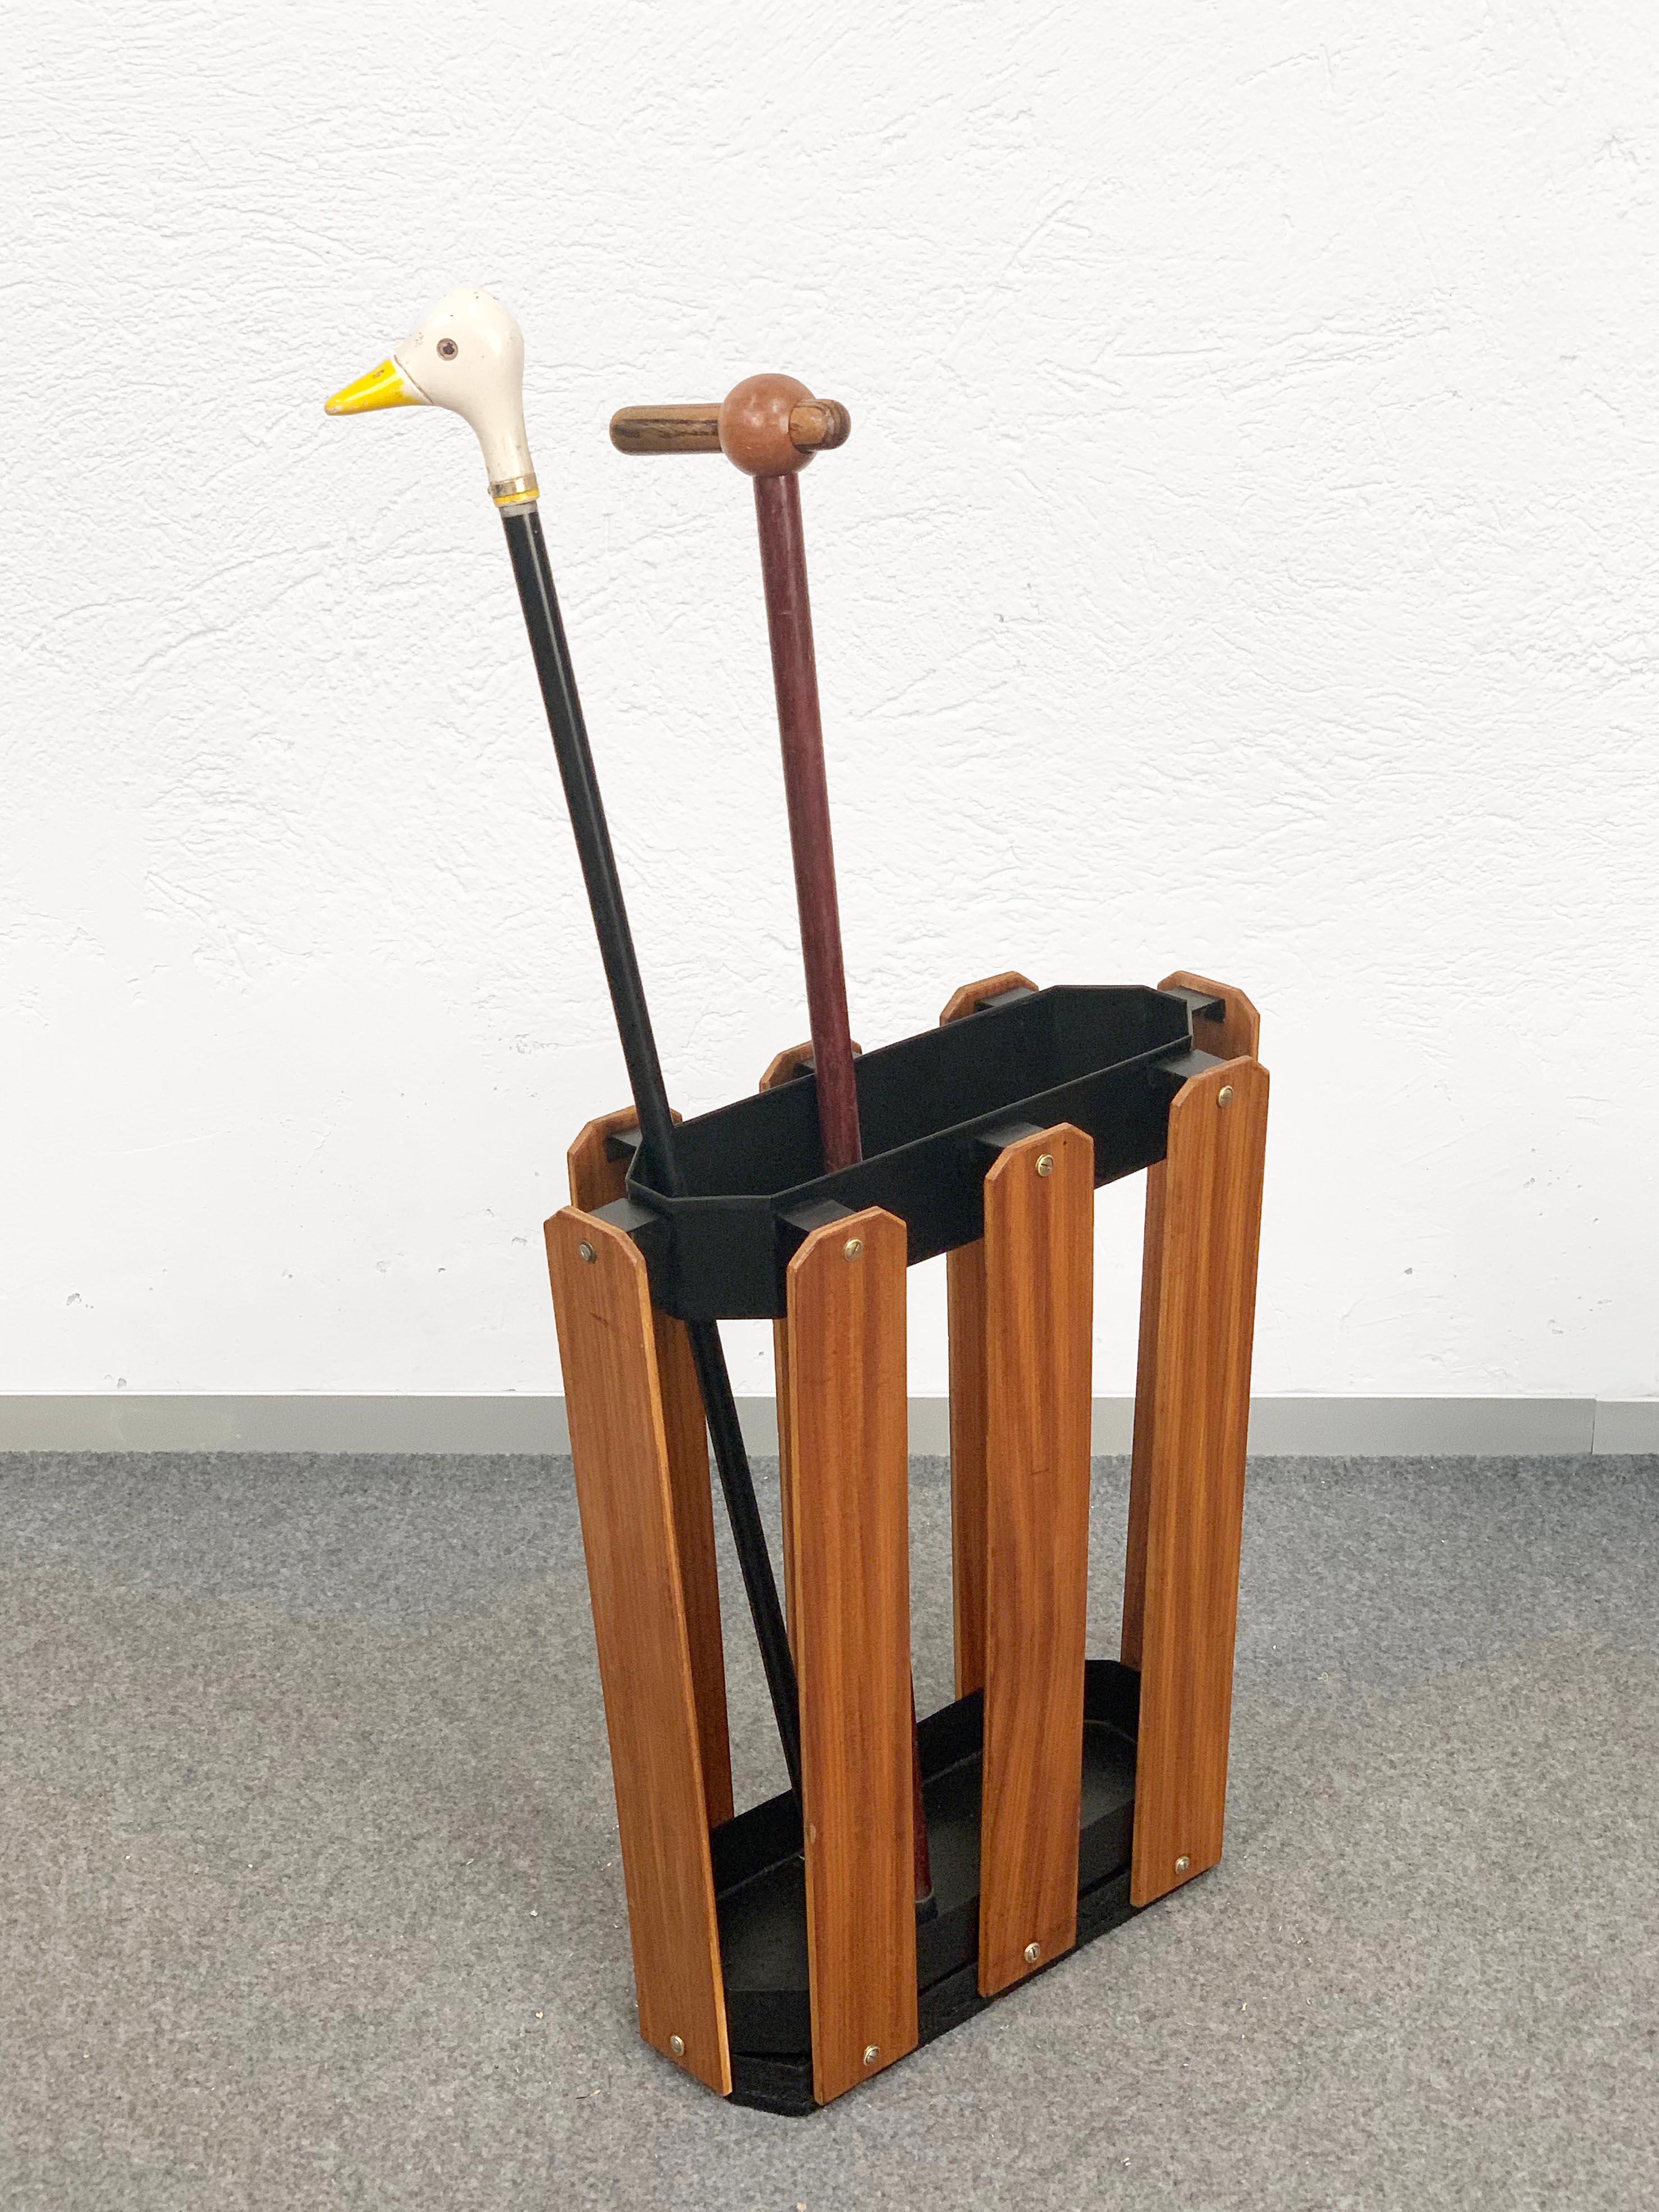 A wonderful Italian umbrella stands from the 1970s, made of wood and black metal.

The item is in good condition and it could be used as a cane holder too. A marvellous piece for an entrance hallway.

Measures (cm):
Depth 18
Width 47
Height 51.